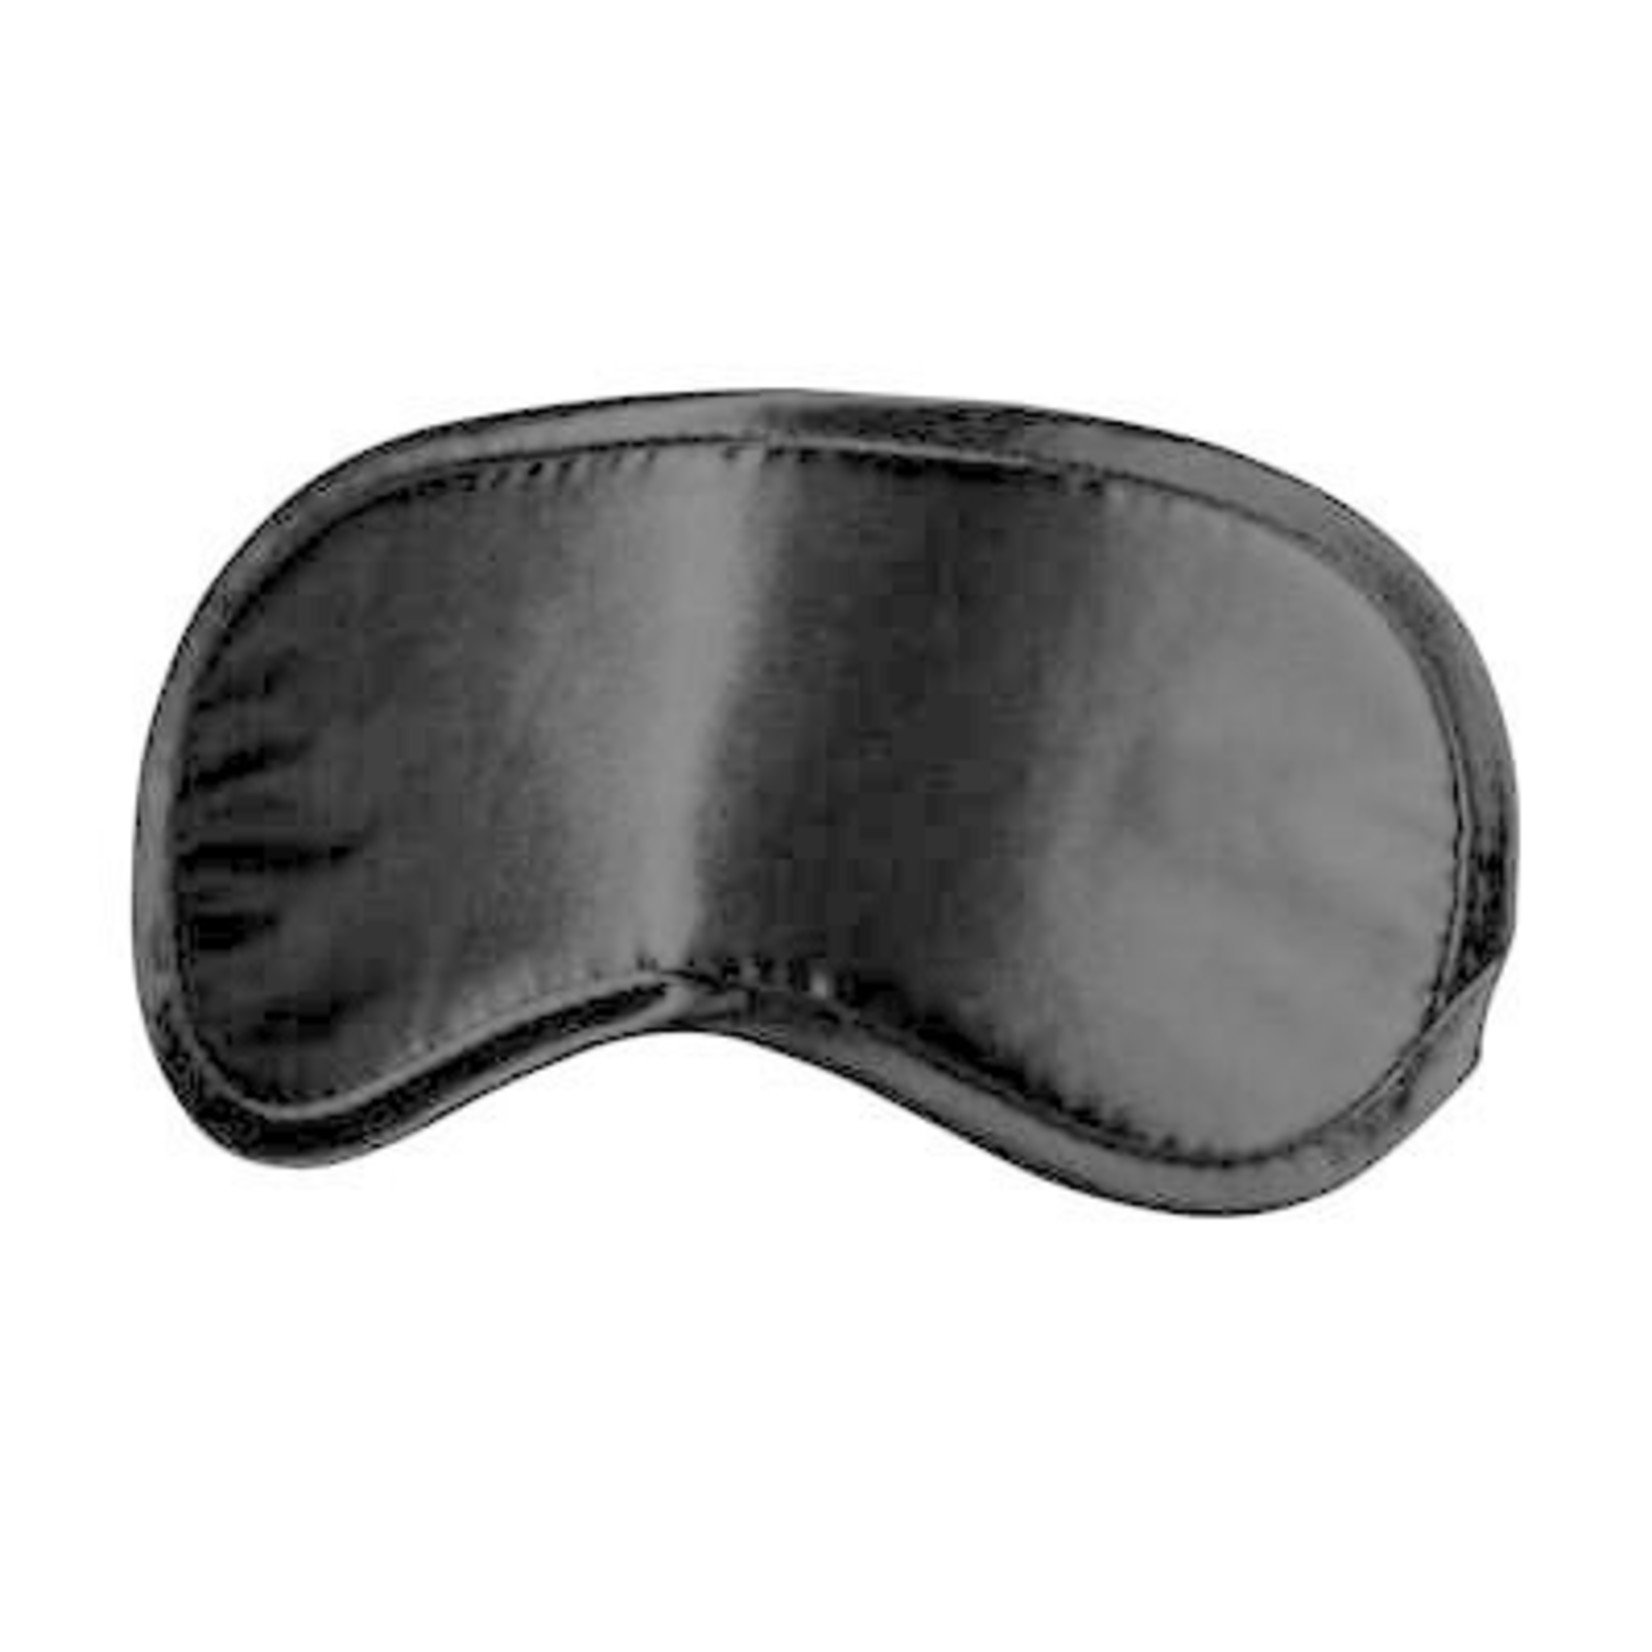 OUCH SHOTS - OUCH! - SOFT EYEMASK - BLACK